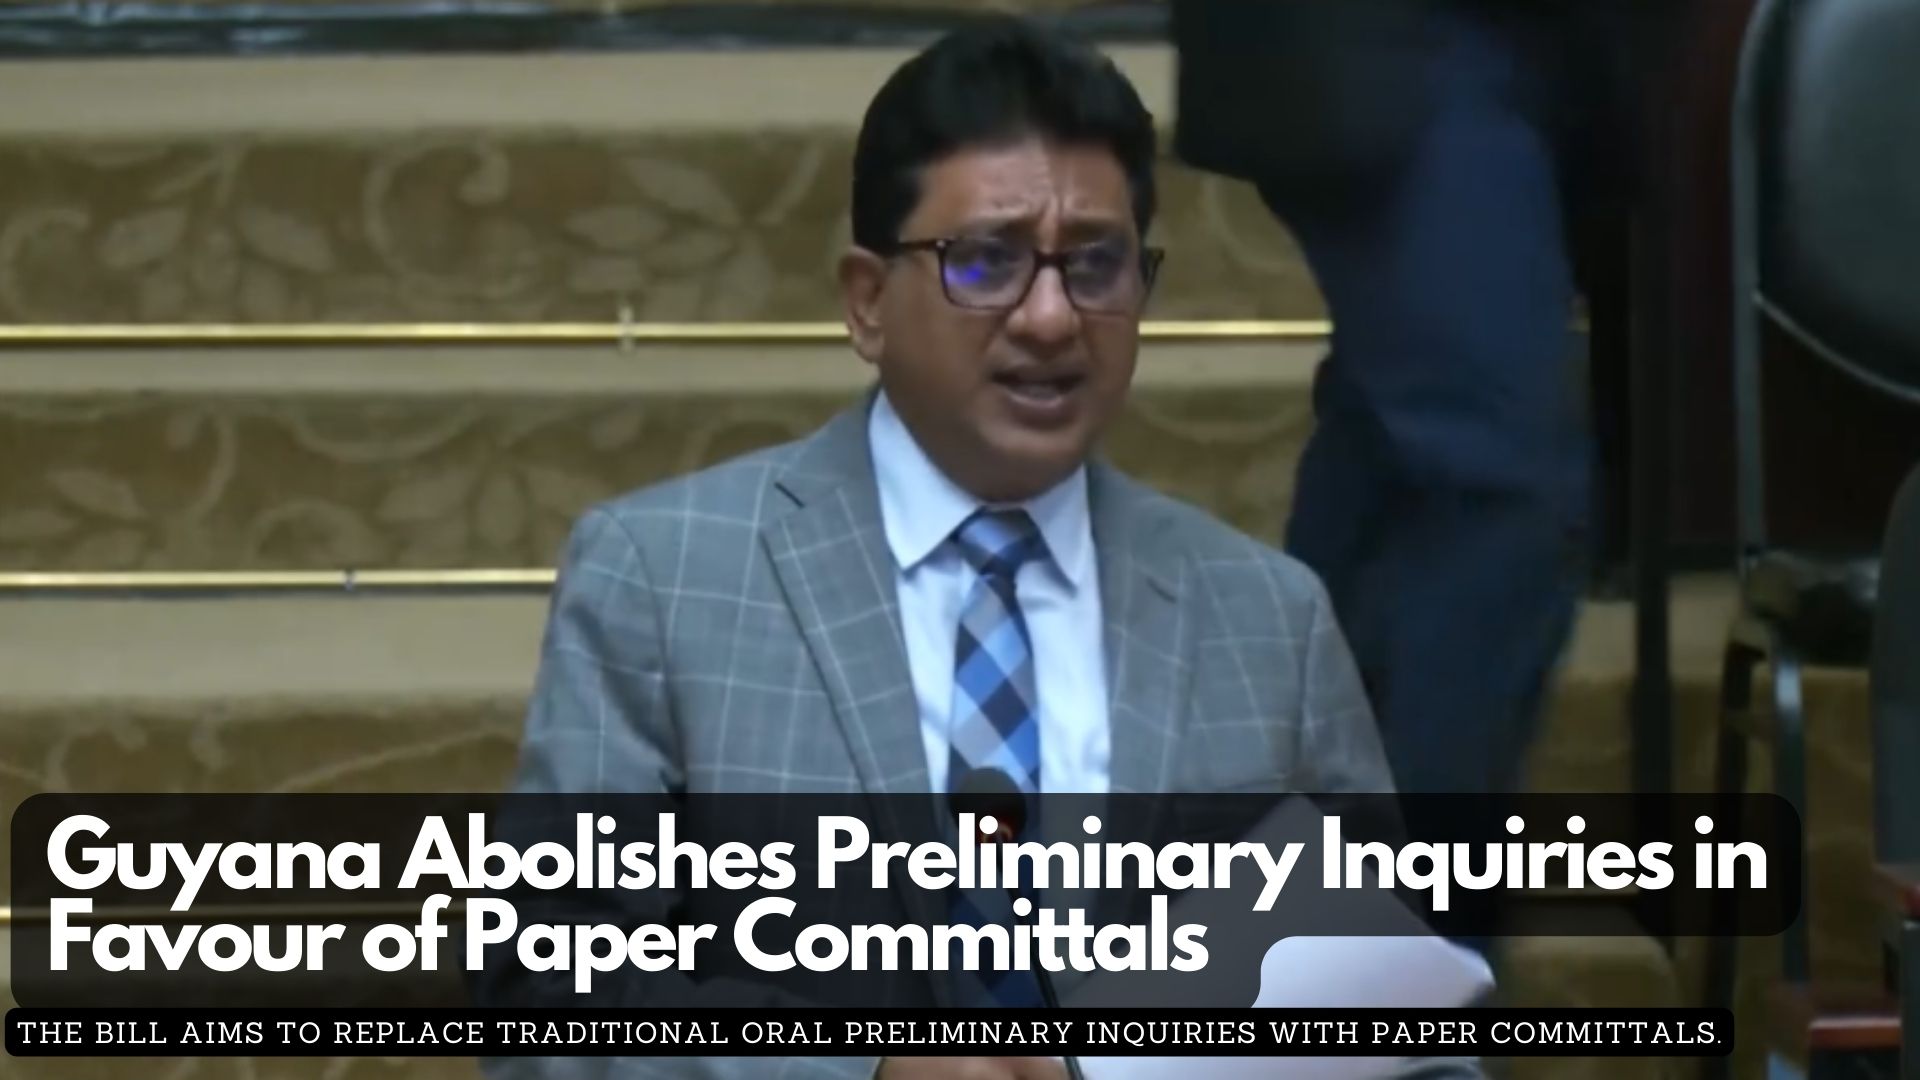 Guyana Abolishes Preliminary Inquiries in Favour of Paper Committals